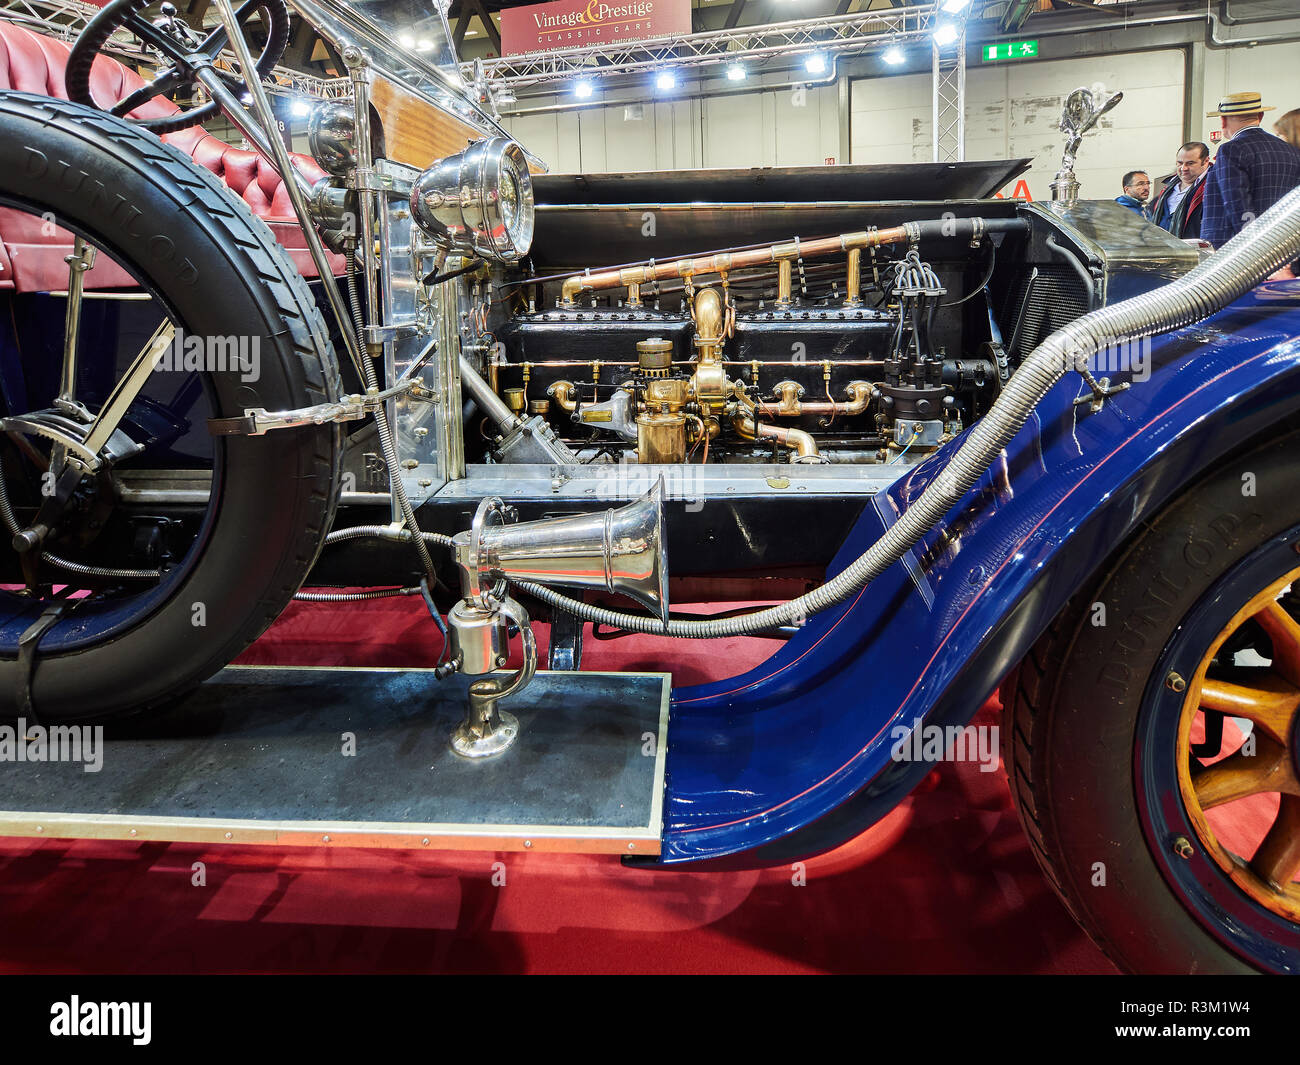 Milan, Lombardy Italy - November 23 , 2018 - 1911 Rolls-Royce Silver Ghost Rois des Belges Tourer motor display at Autoclassica Milano 2018 edition at Fiera Milano Rho Credit: Armando Borges/Alamy Live News Stock Photo